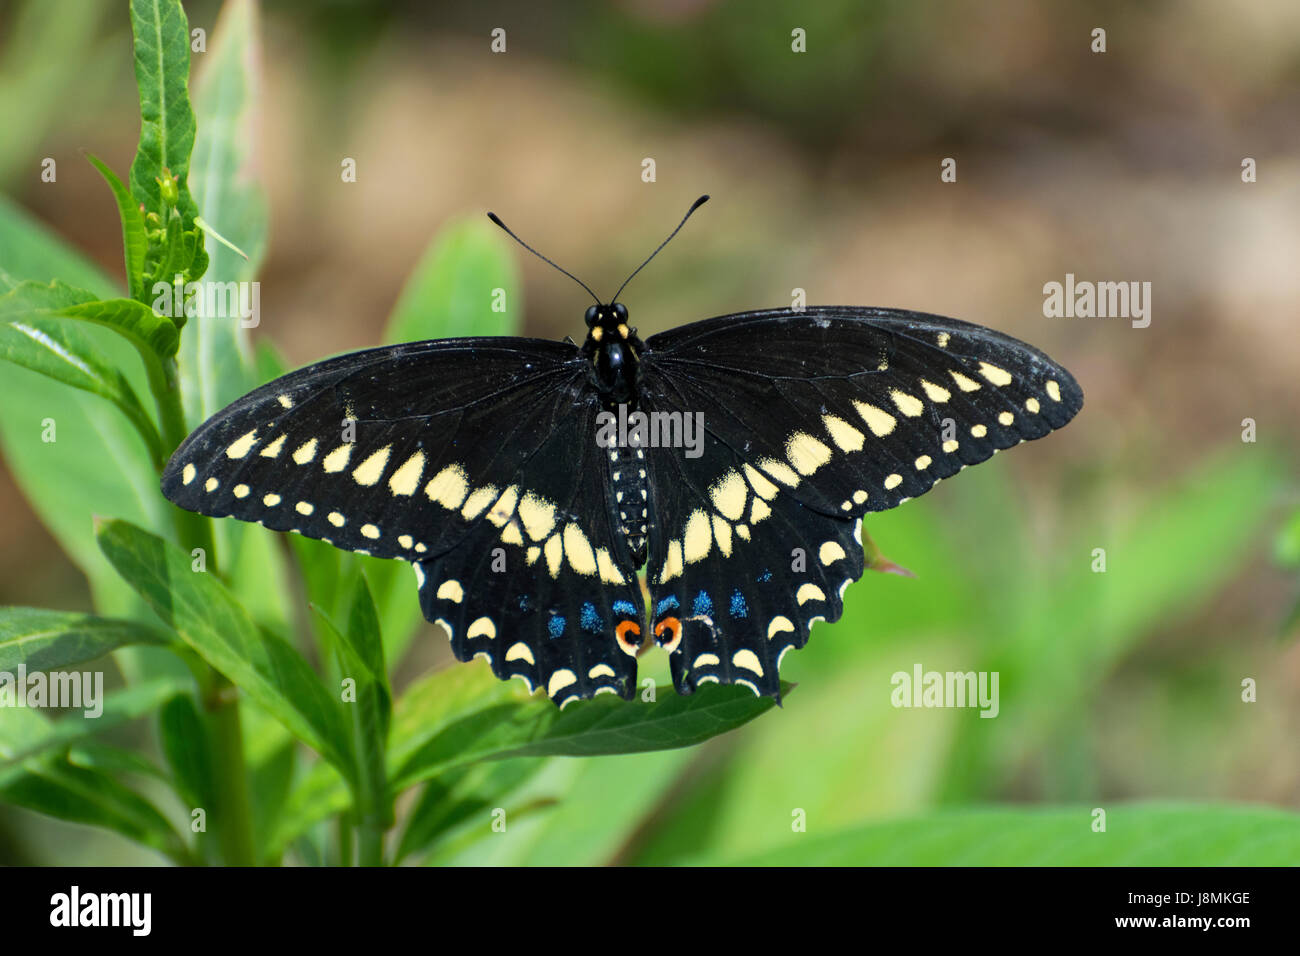 Closeup of a Black Swallowtail Butterfly sitting on a leave with its wings spread showing the beautiful pattern of yellow, blue, and orange spots. Stock Photo